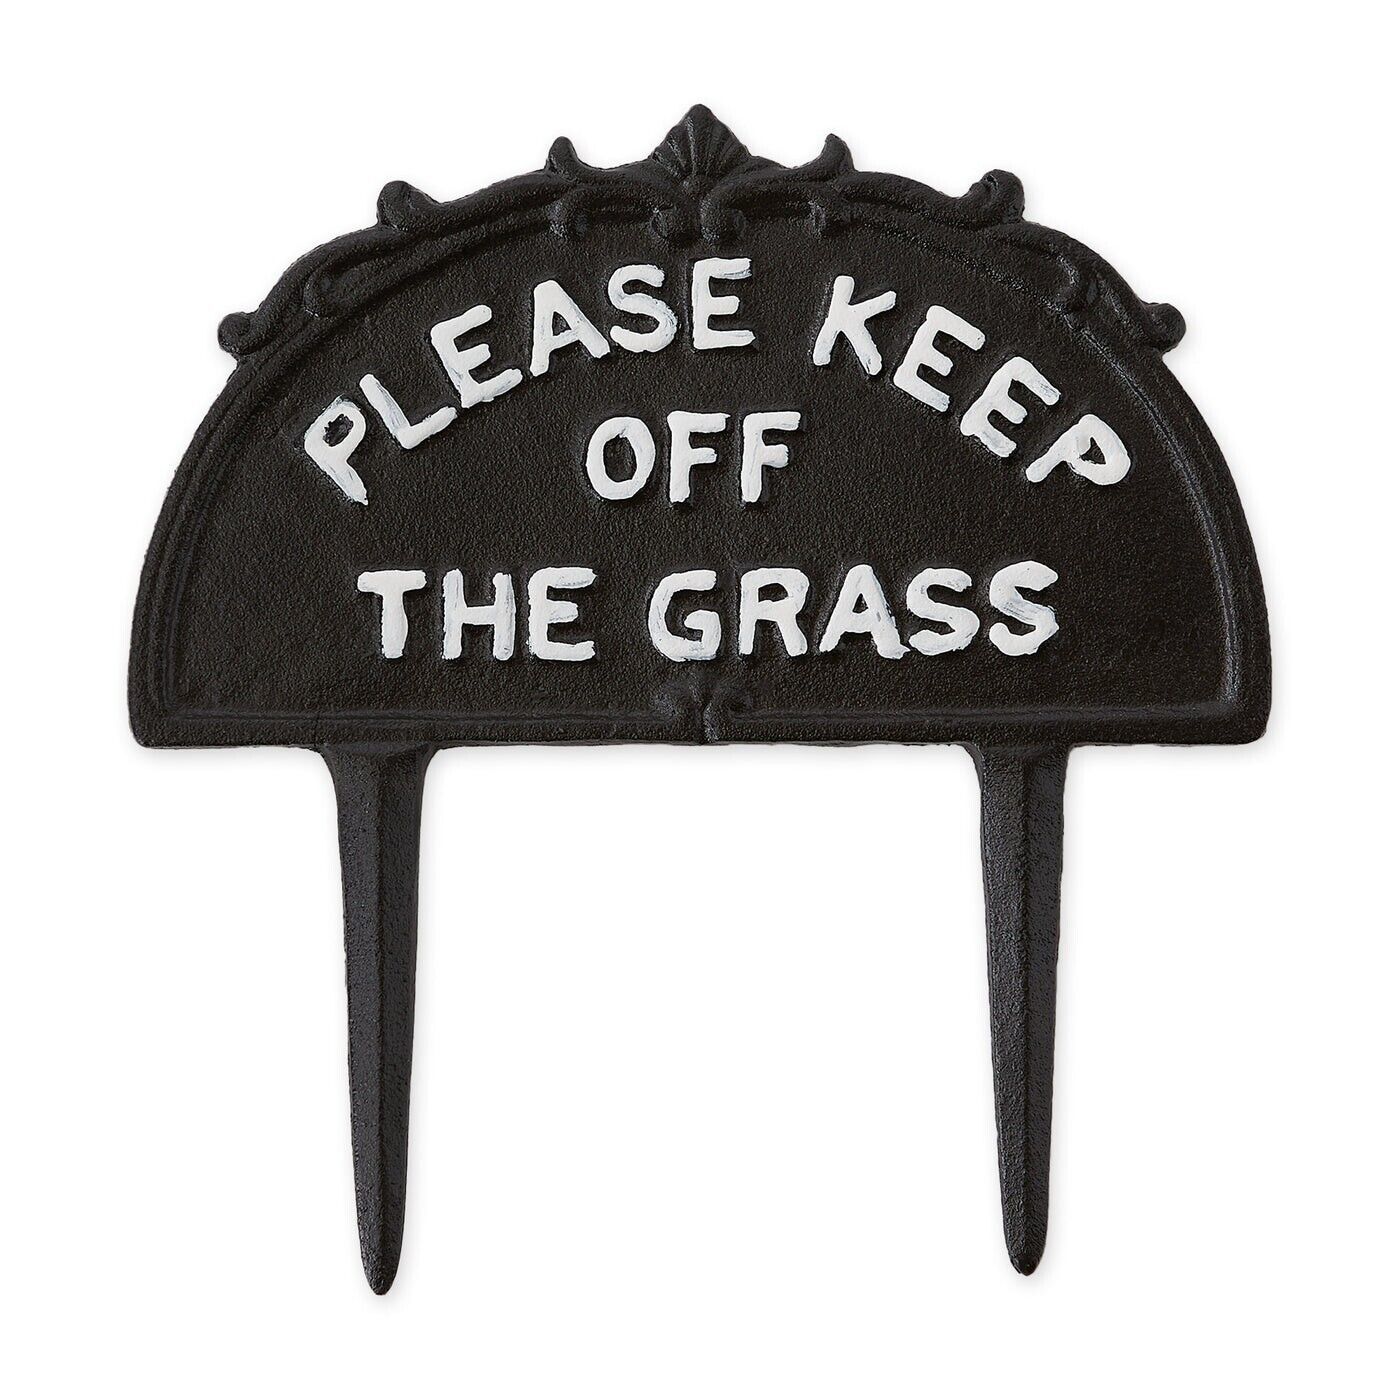 Garden Stake Please Keep Off The Grass Home Yard Decor Iron Plaques Signs